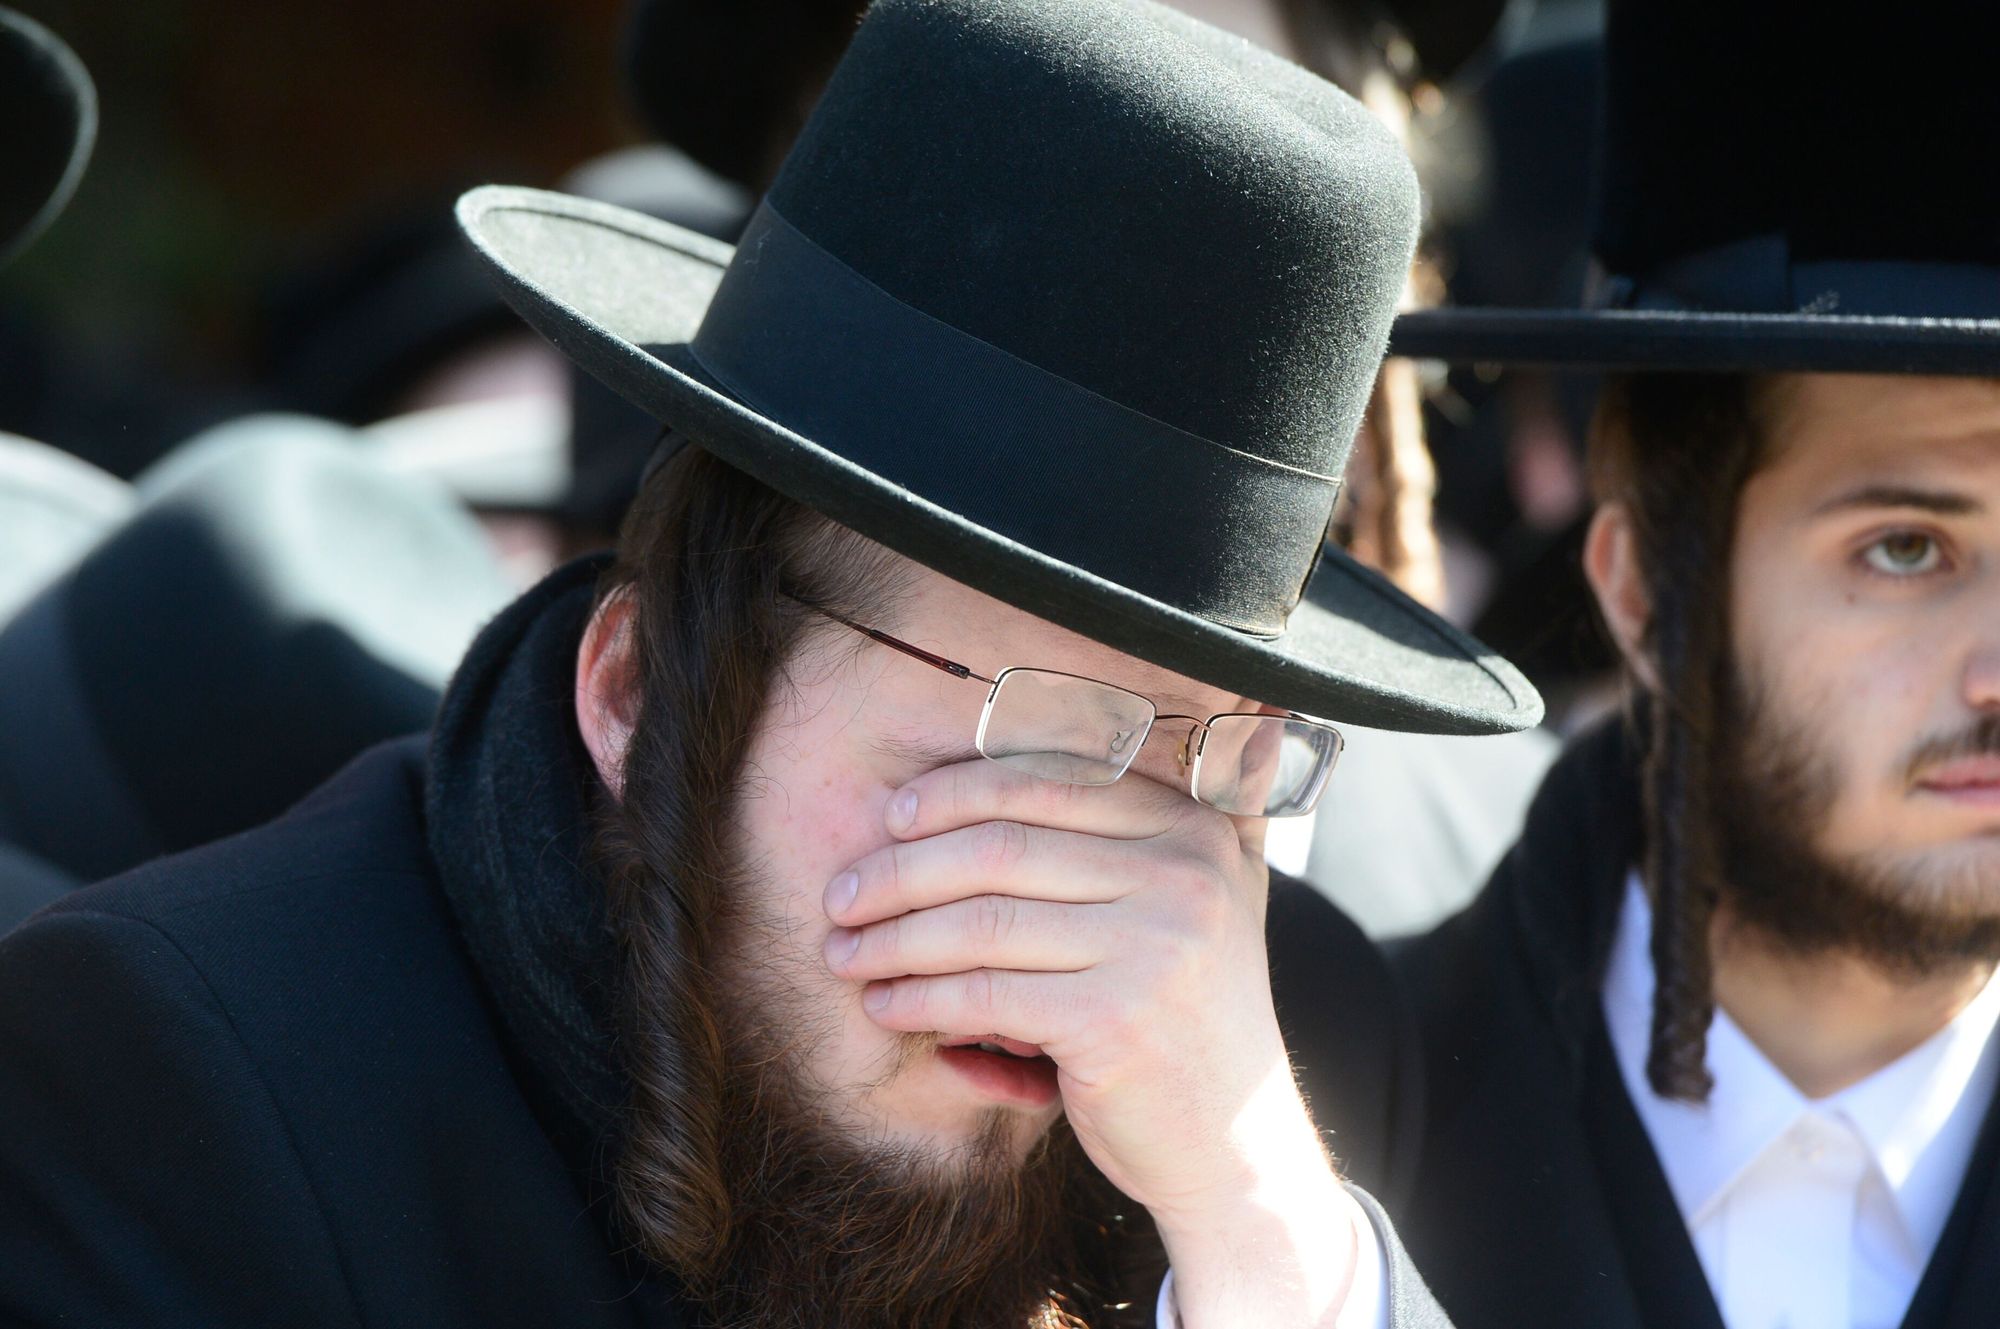 Mourners at the funeral of The Skulener Rebbe, Rabbi Yisroel Avrohom Portugal (Photo: Todd Maisel)